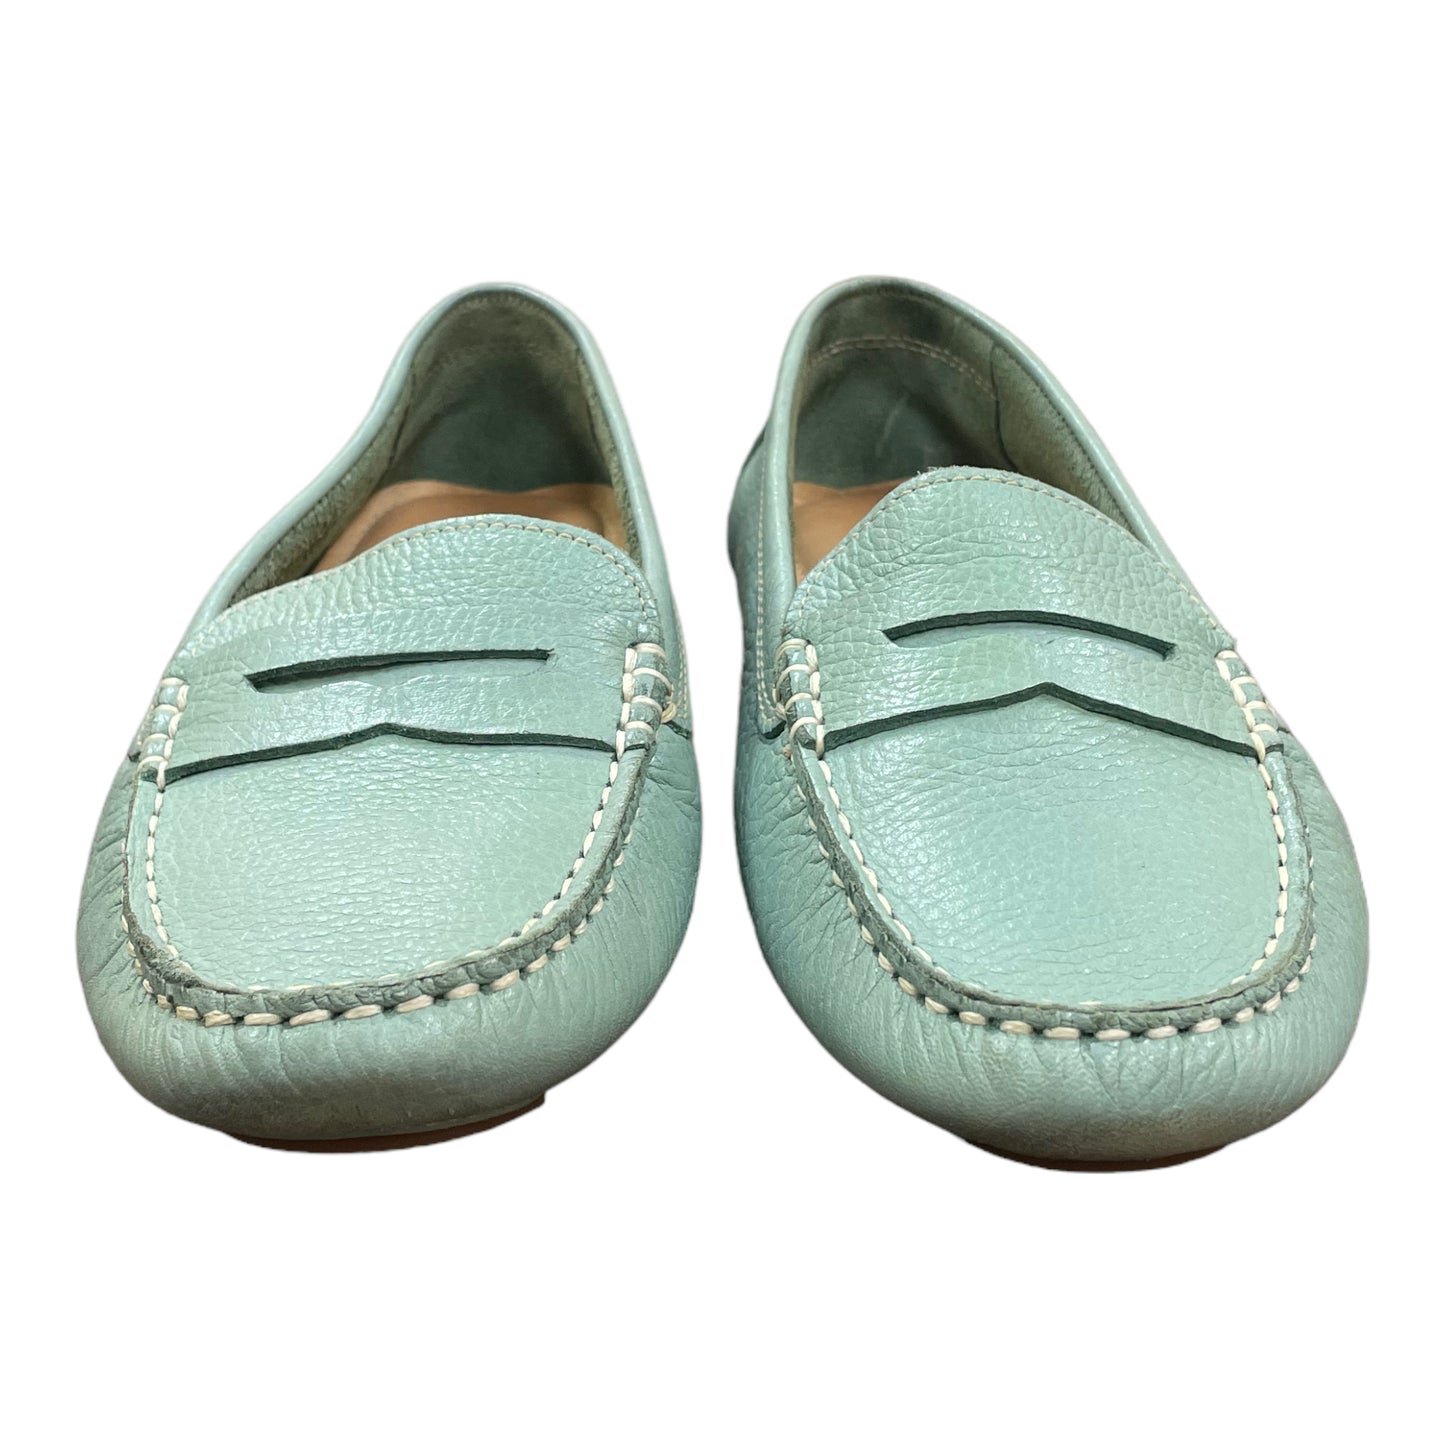 Shoes Flats Loafer Oxford By Bass  Size: 5.5